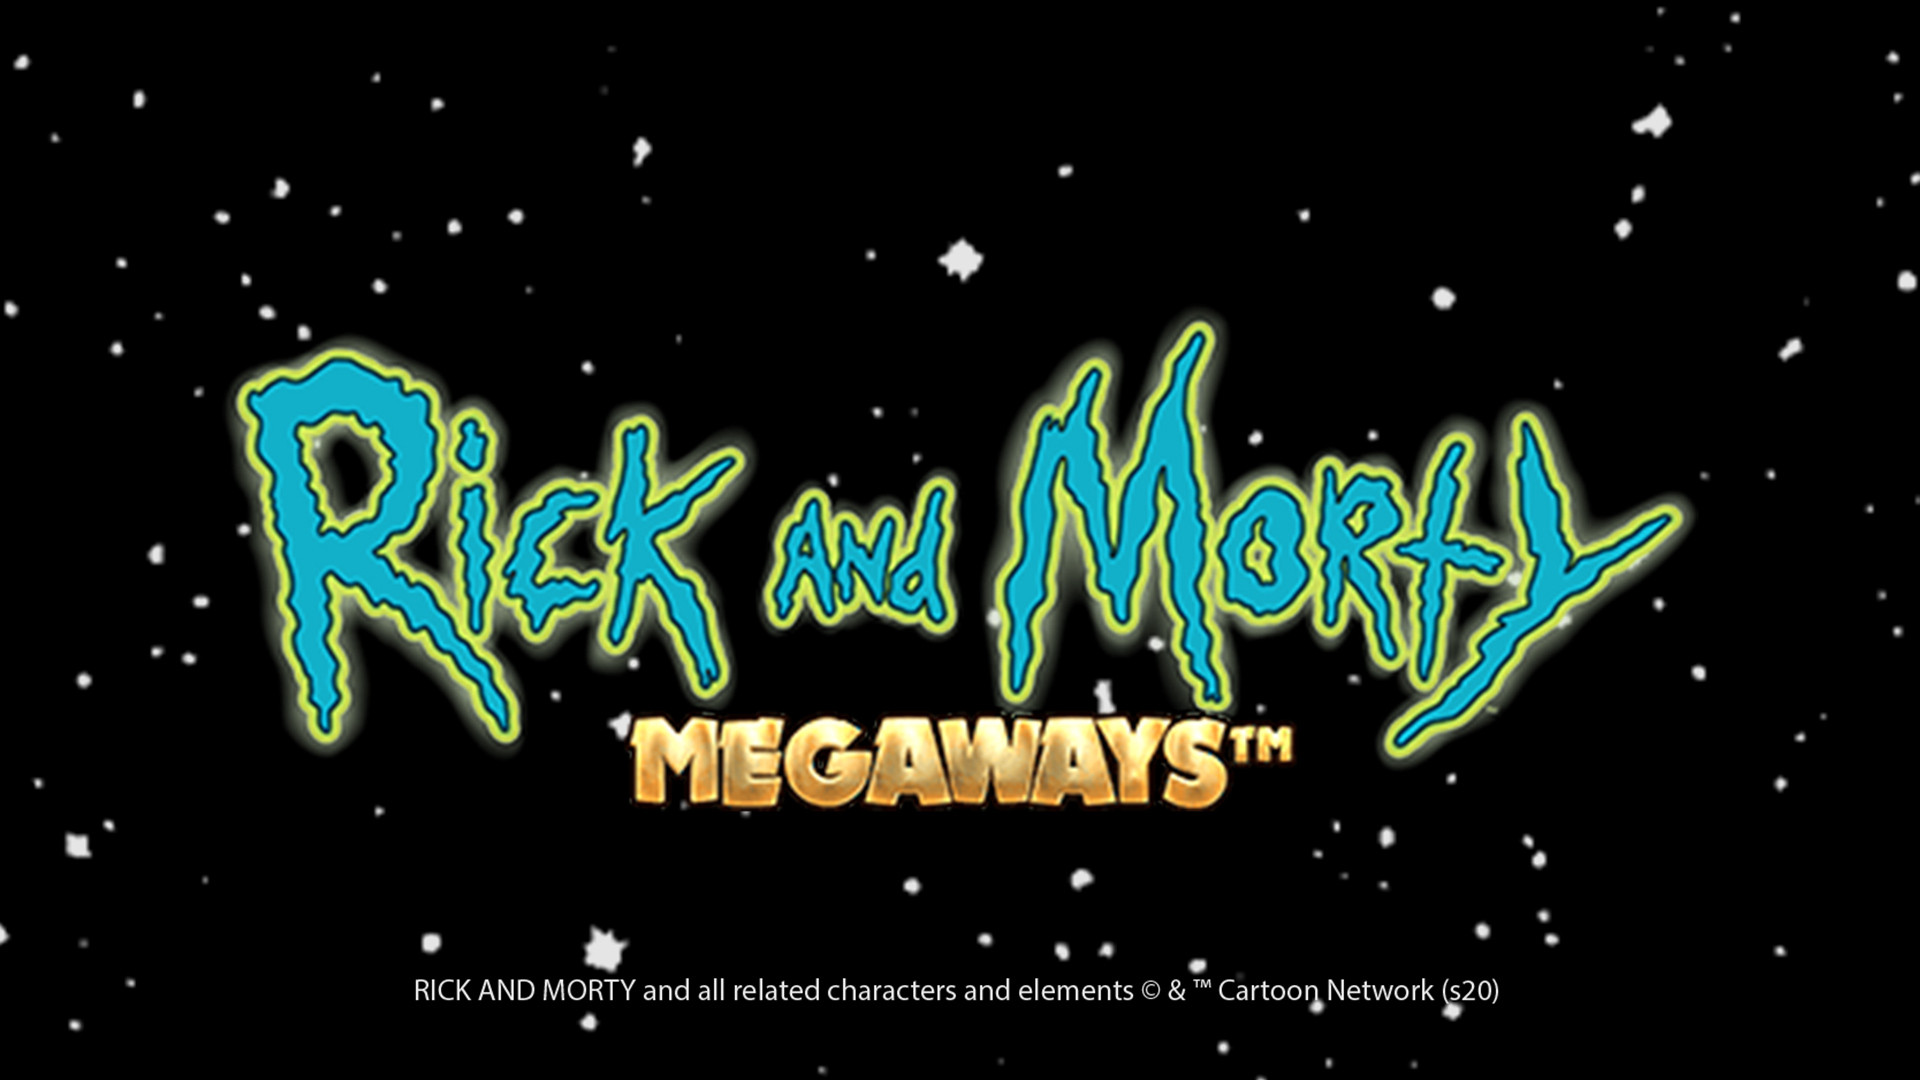 Rick and Morty MEGAWAYS